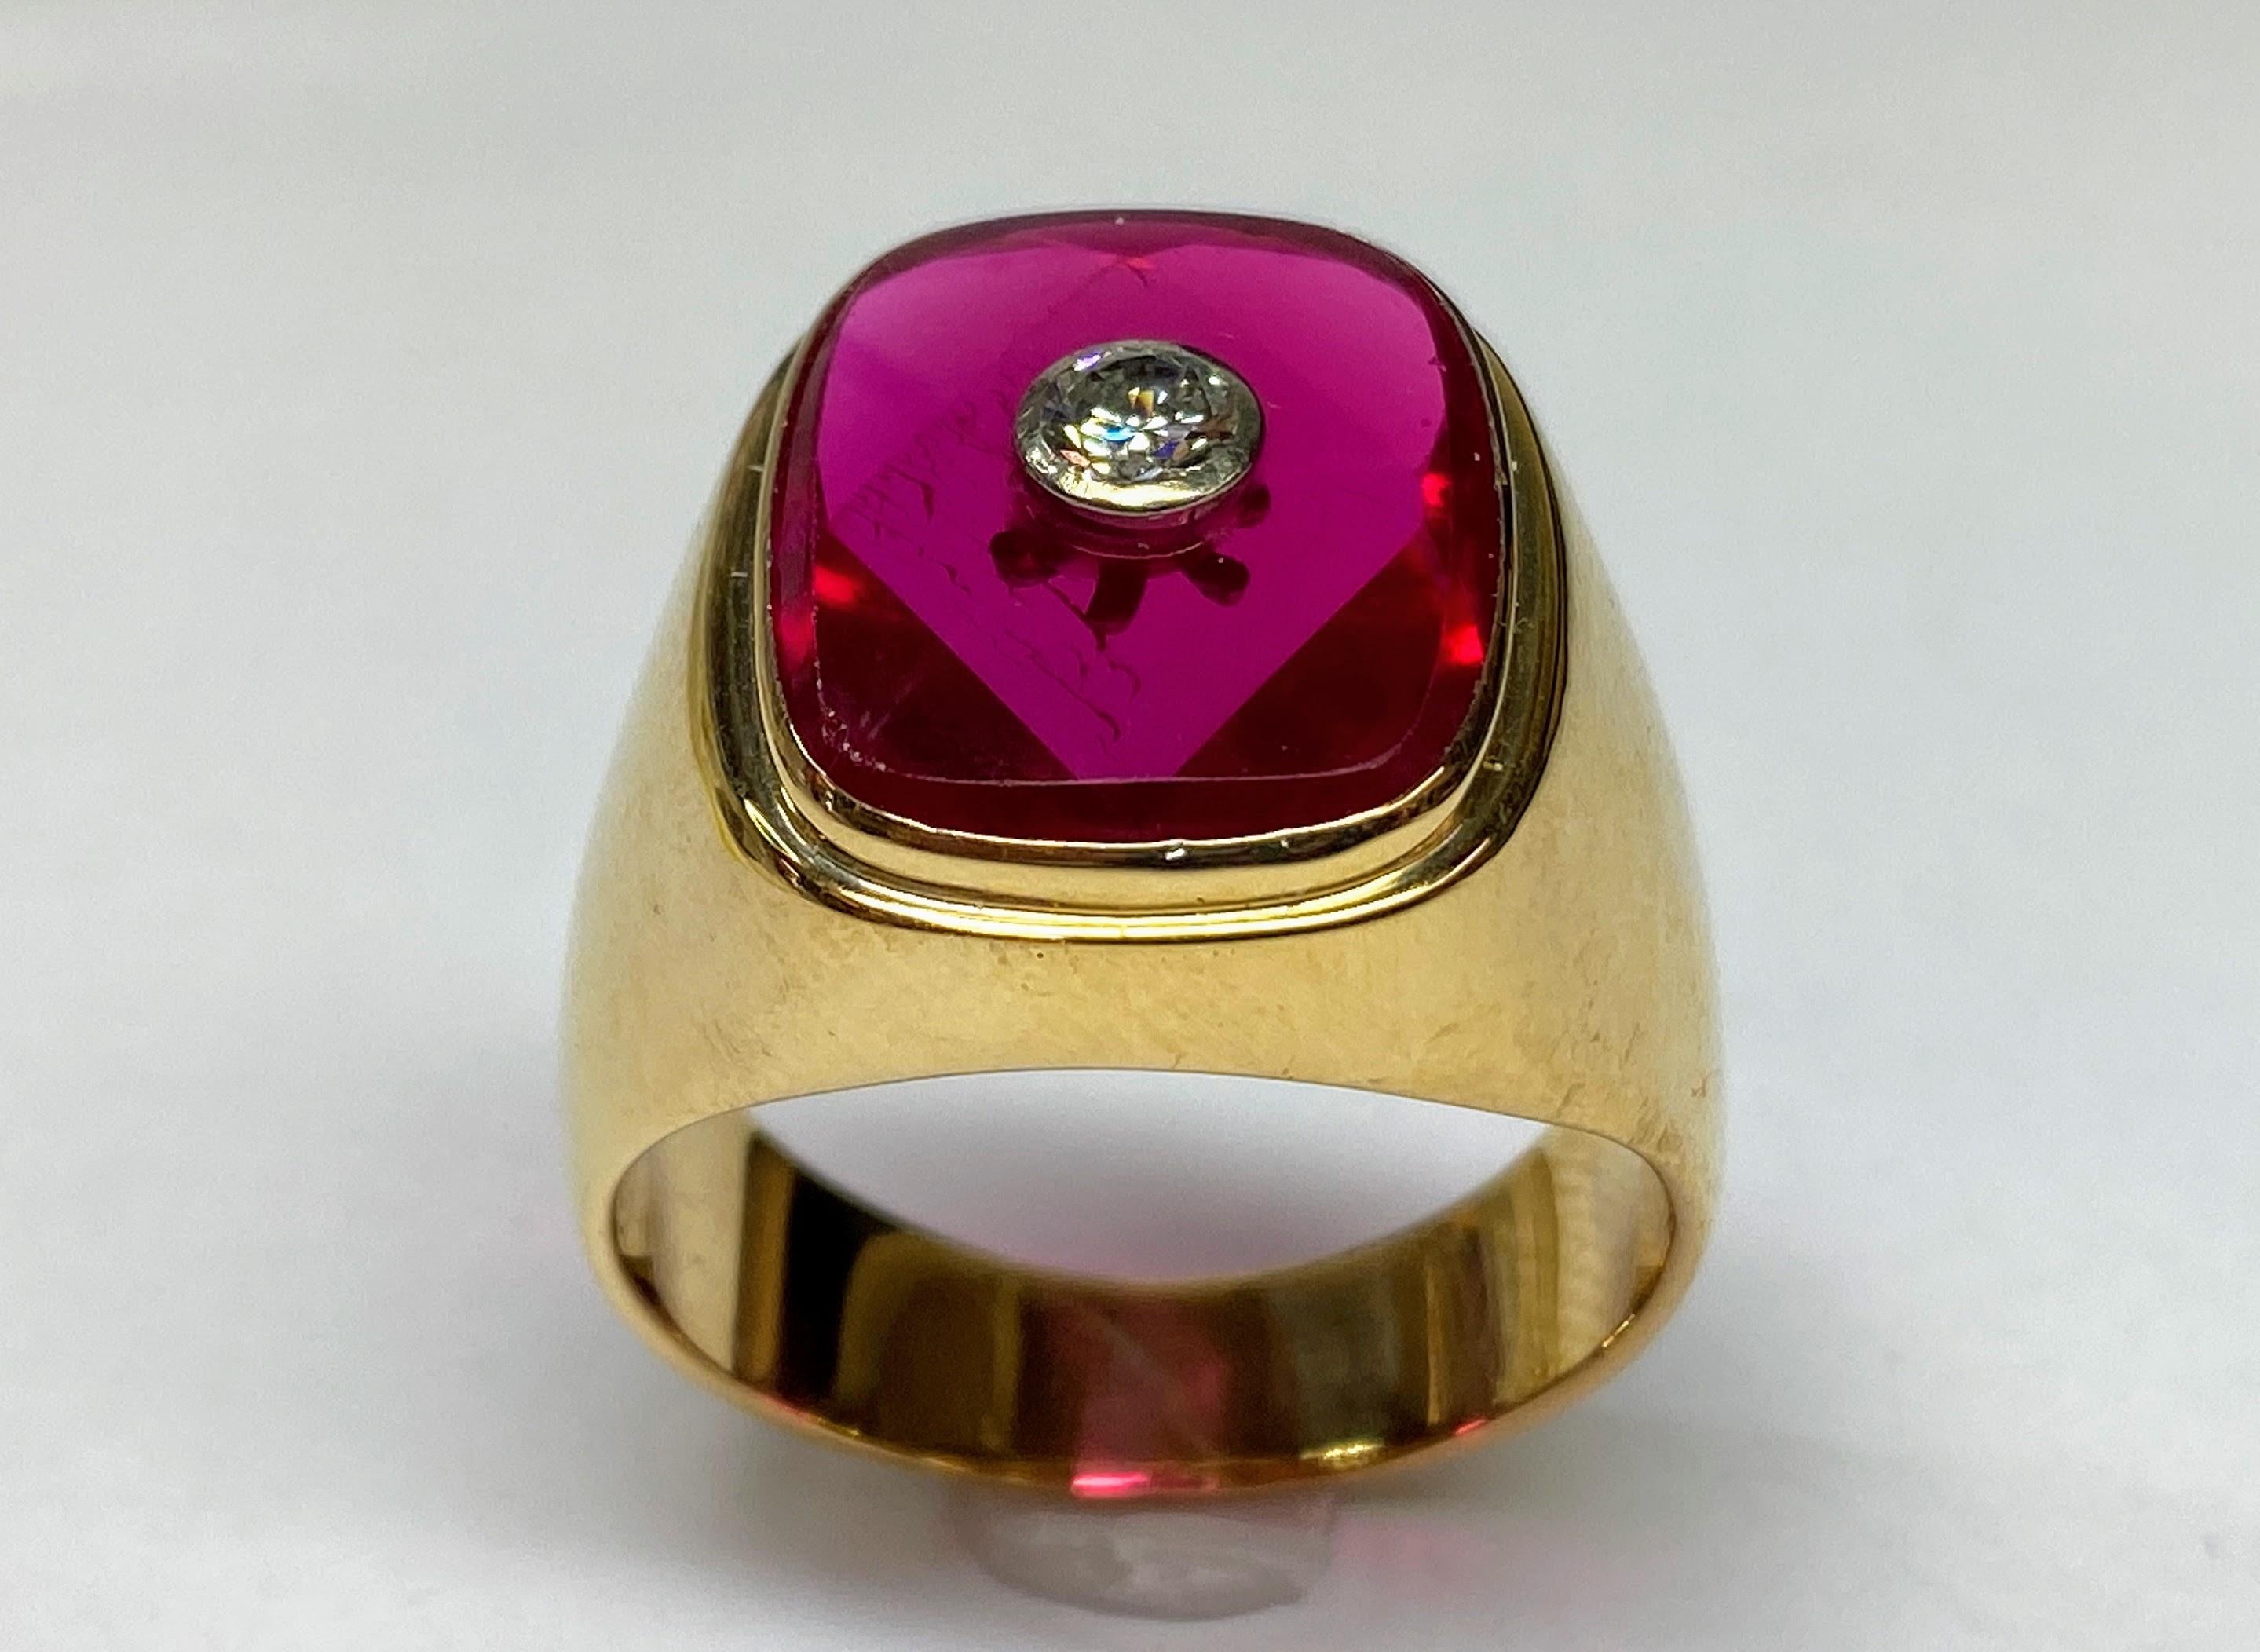 18K Yellow Gold 5.73TCW Created Ruby & Brilliant Diamond Ring Size- 12.5

This distinguished signet ring, crafted in sumptuous 18K yellow gold, presents a marriage of classic design with modern flair, tailored for a ring size of 12.5. It showcases a